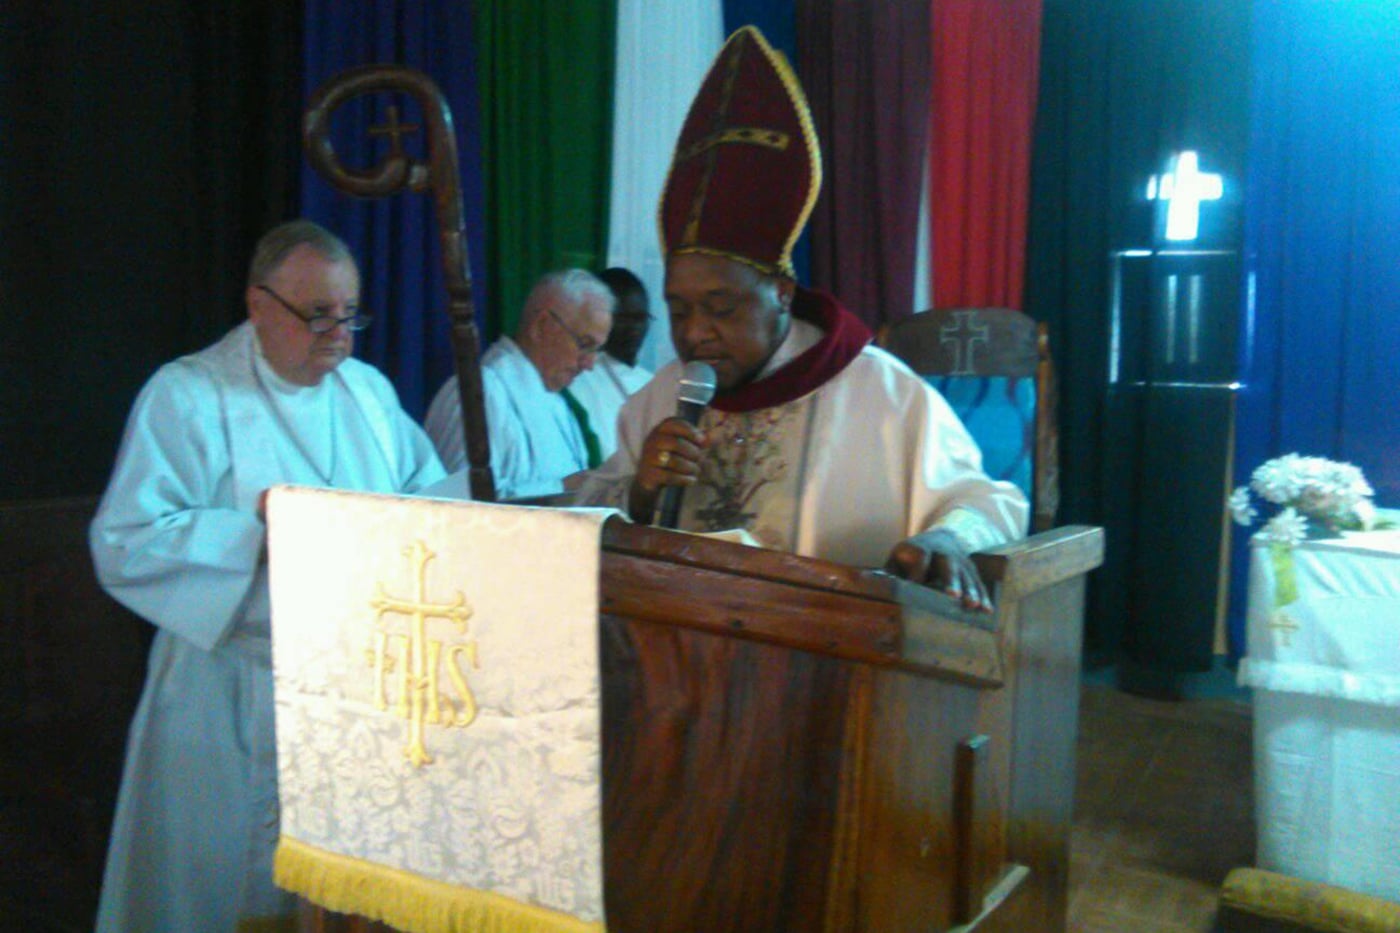 ELCSS/S Bishop Rev. Peter Anibati Abia leads opening services for CLIHM seminary in South Sudan.